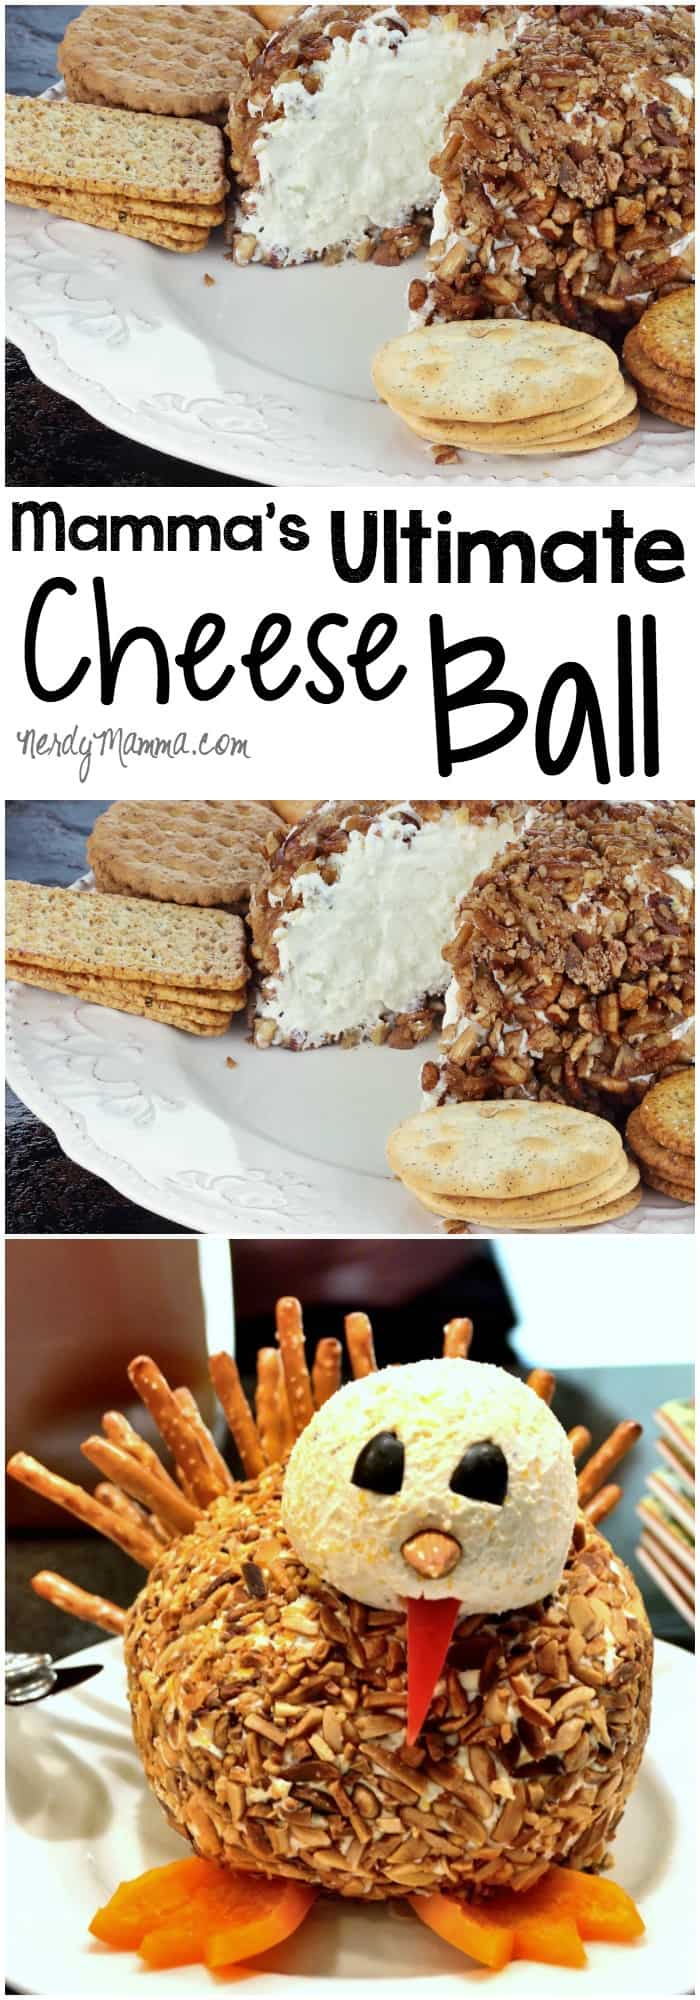 This is the easiest and yummiest cheese ball recipe ever. So smooth and the flavors are just awesome. I make it every Thanksgiving--shaped like a turkey. LOL!